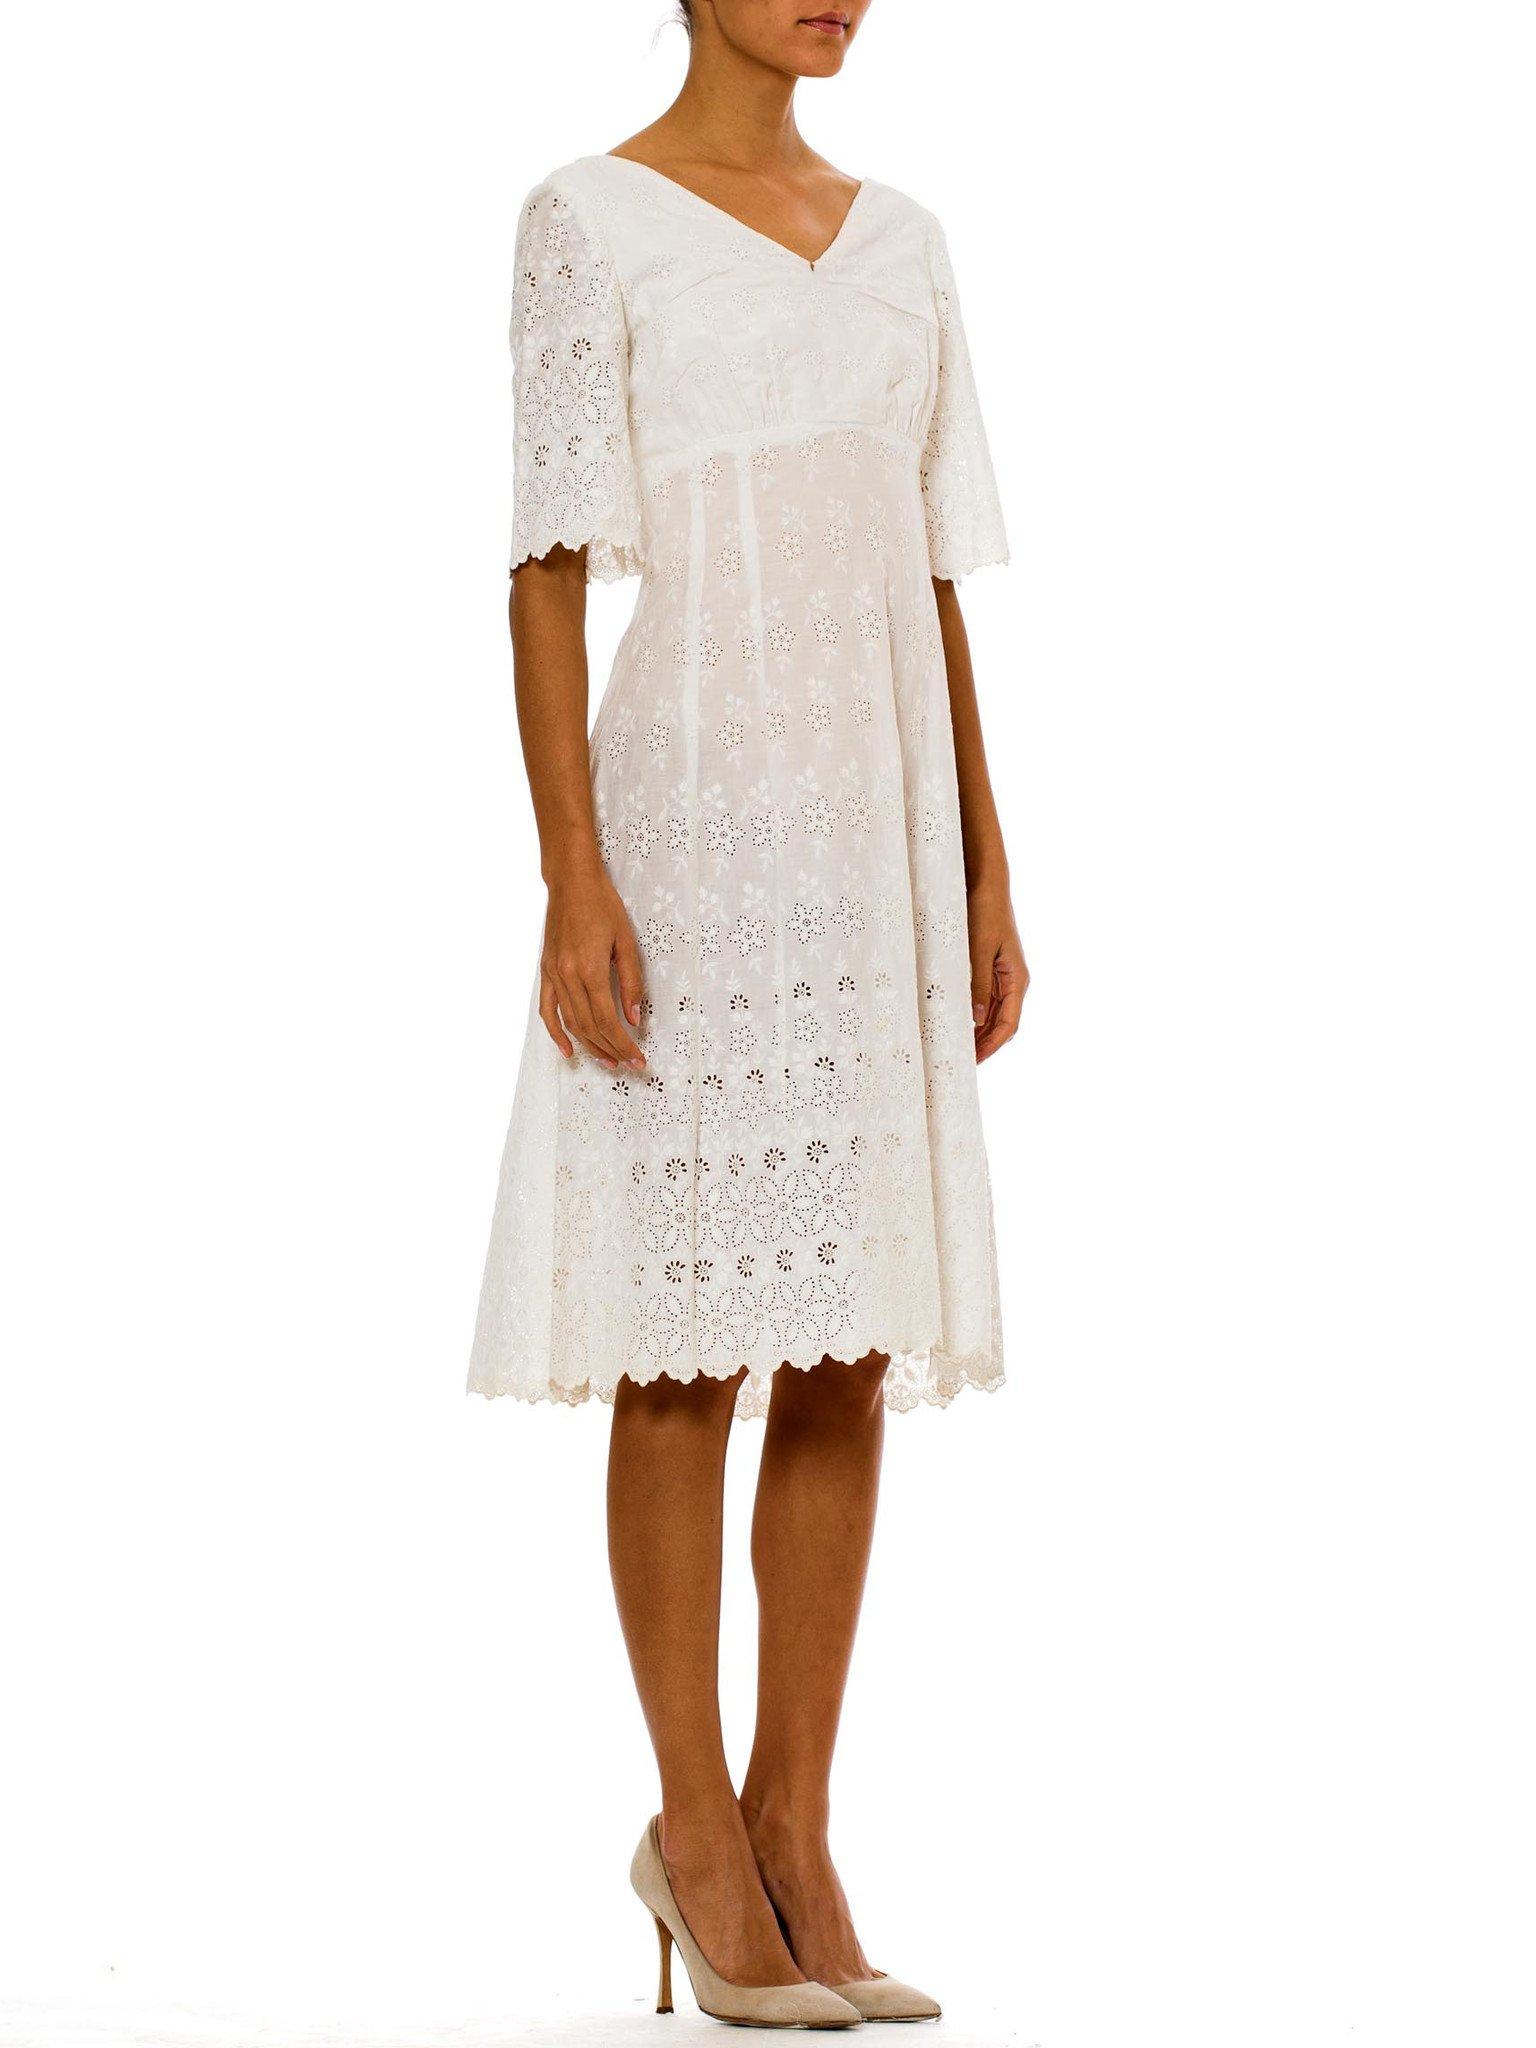 Women's Victorian White Organic Cotton Dress With Floral Eyelet Embroidery & Scalloped  For Sale